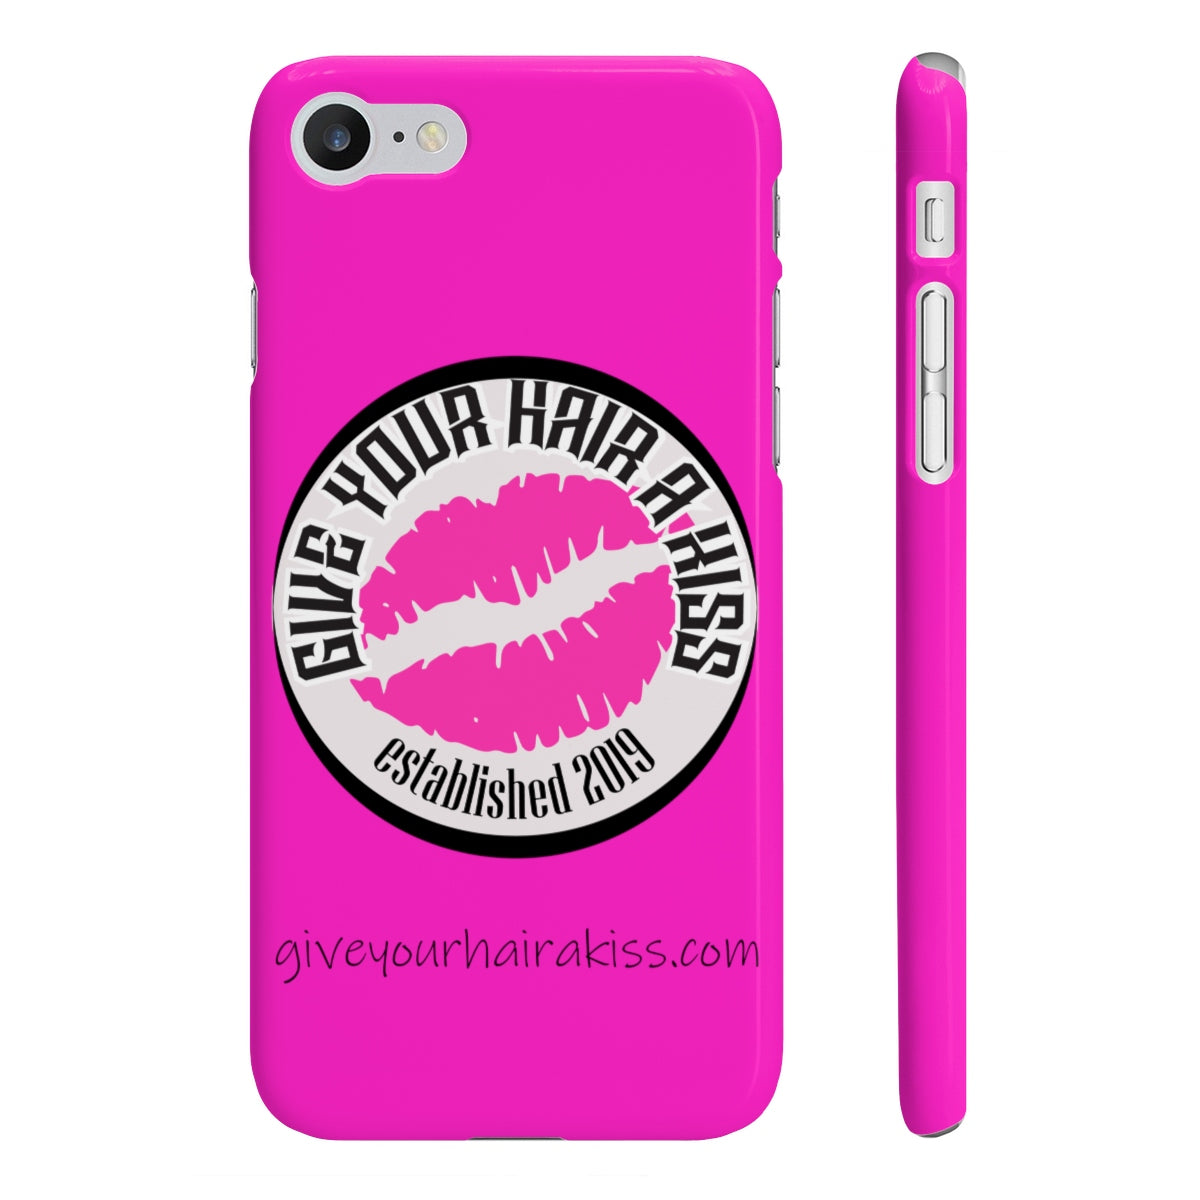 Wpaps Slim Phone Cases - Give Your Hair a Kiss